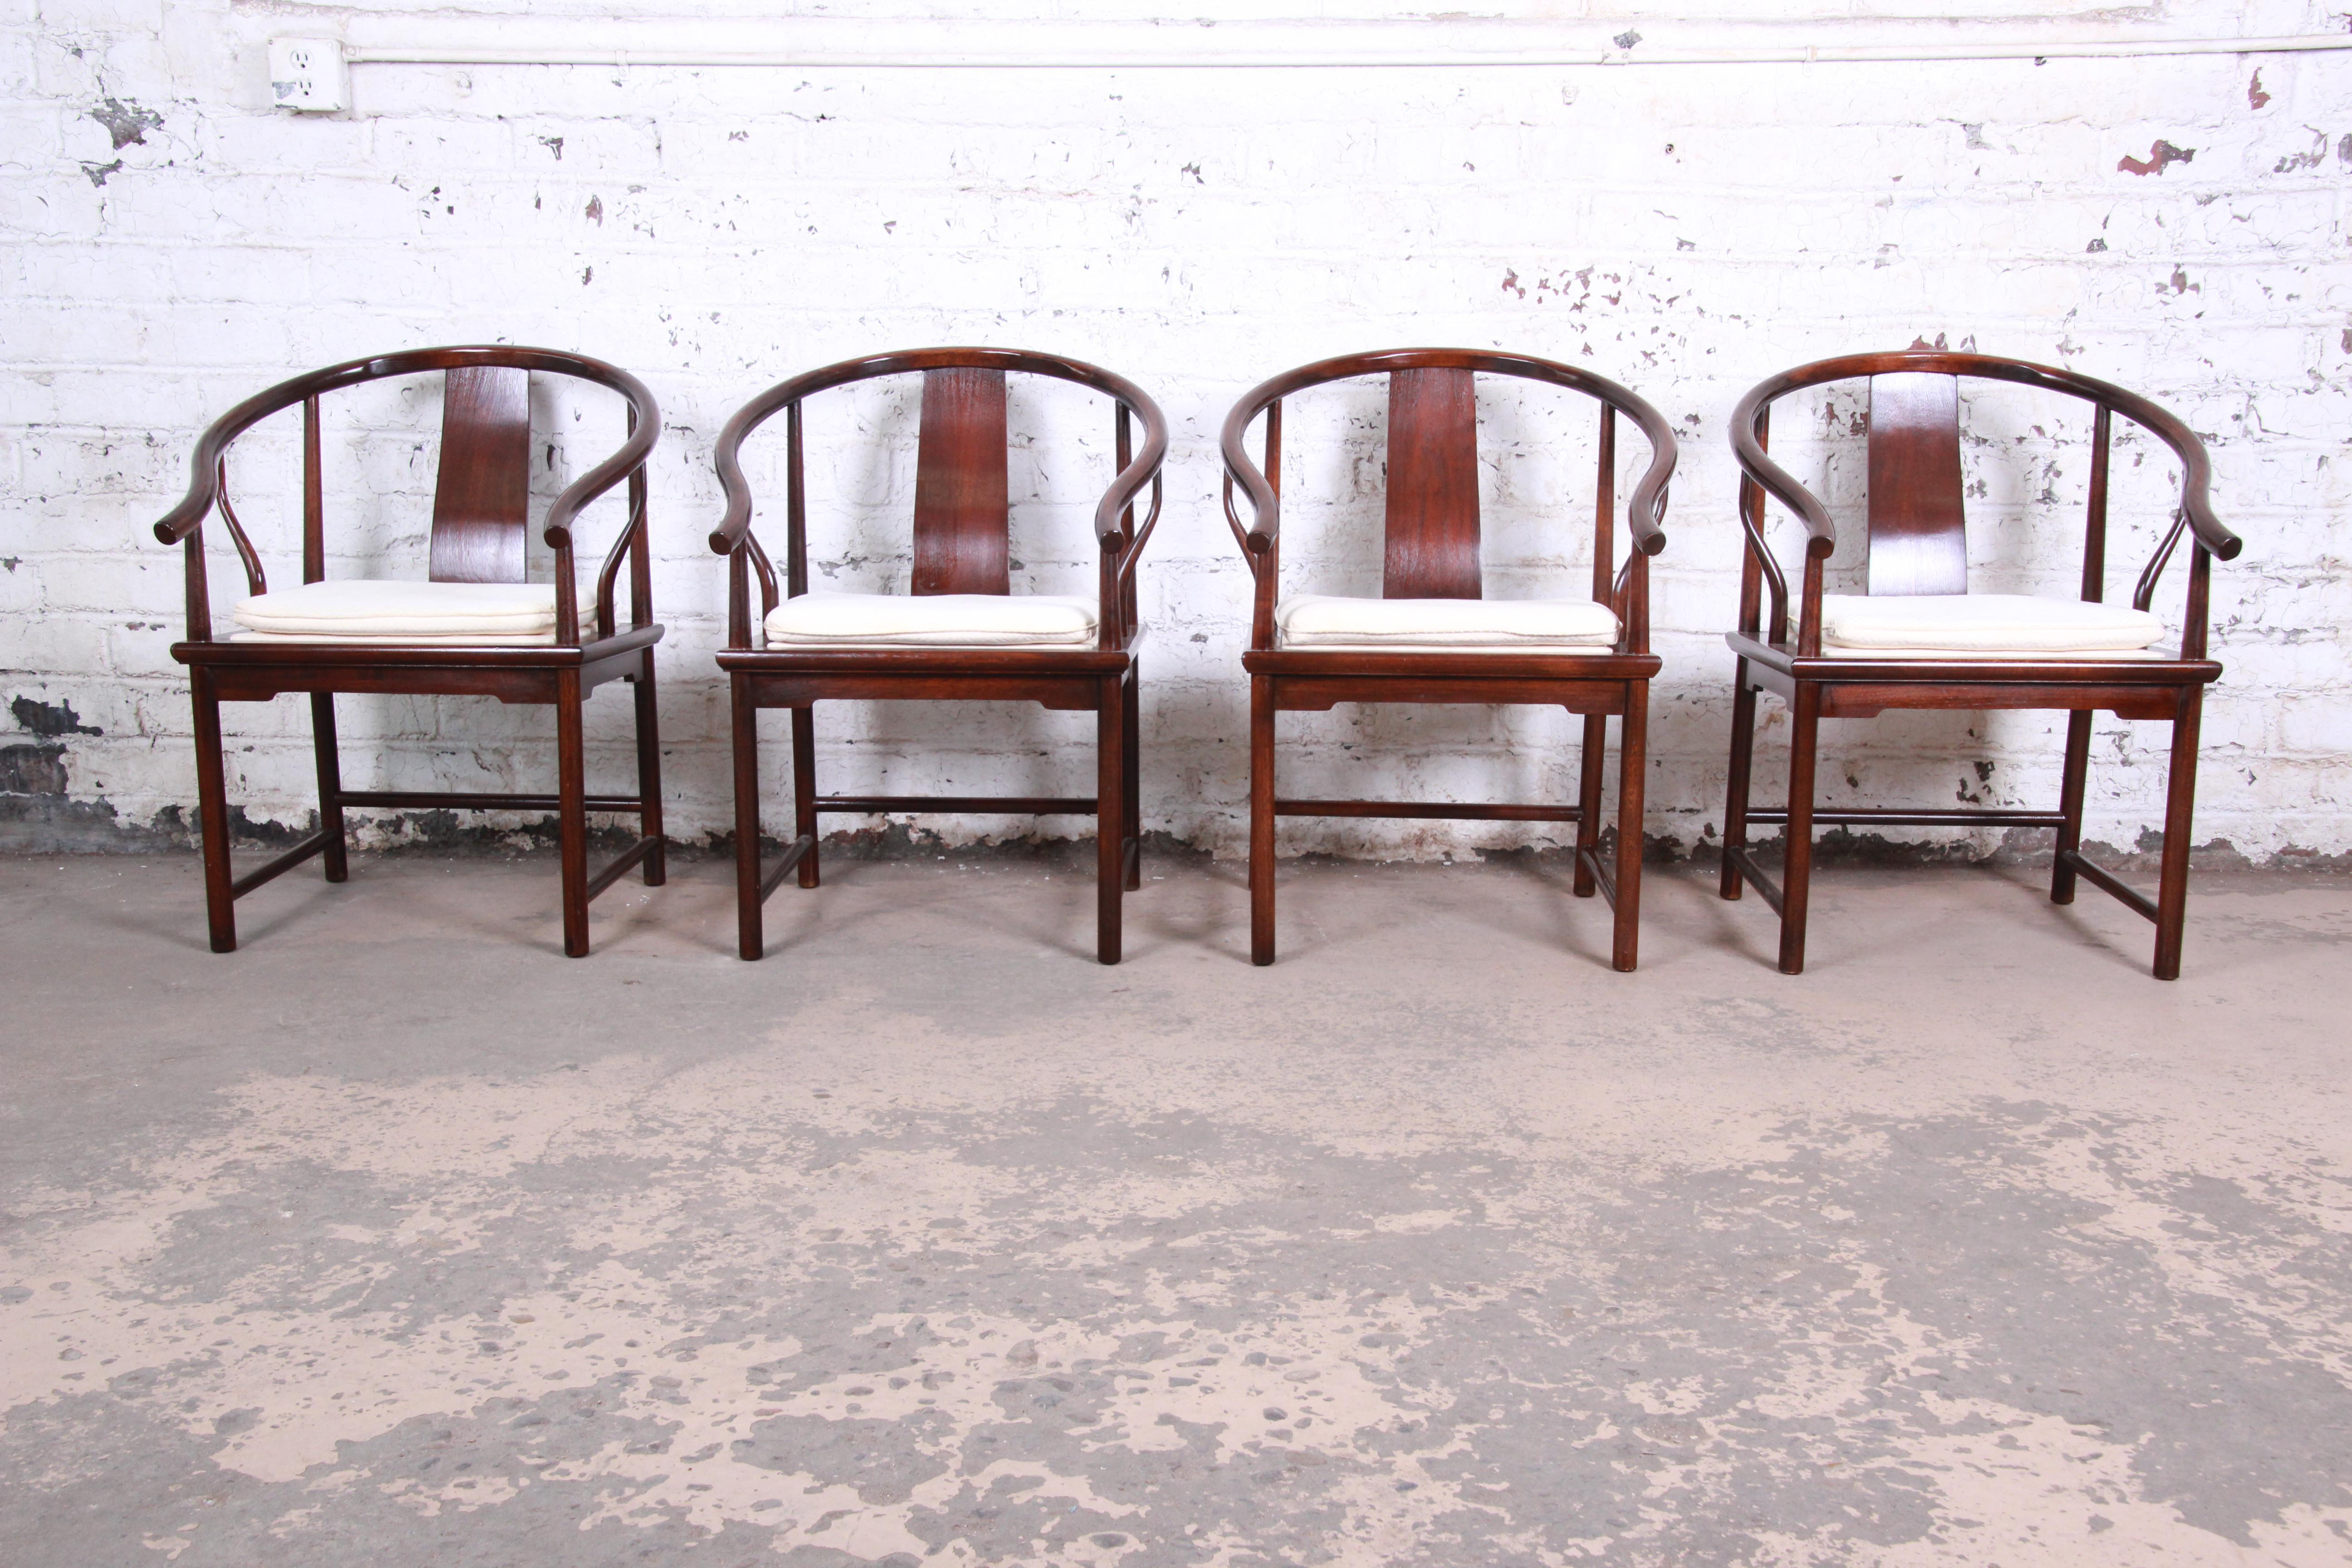 An exceptional set of four Hollywood Regency chinoiserie armchairs designed by Michael Taylor for his Far East collection for Baker Furniture. The chairs feature solid walnut frames with an Asian-inspired horseshoe design. The ivory upholstery with